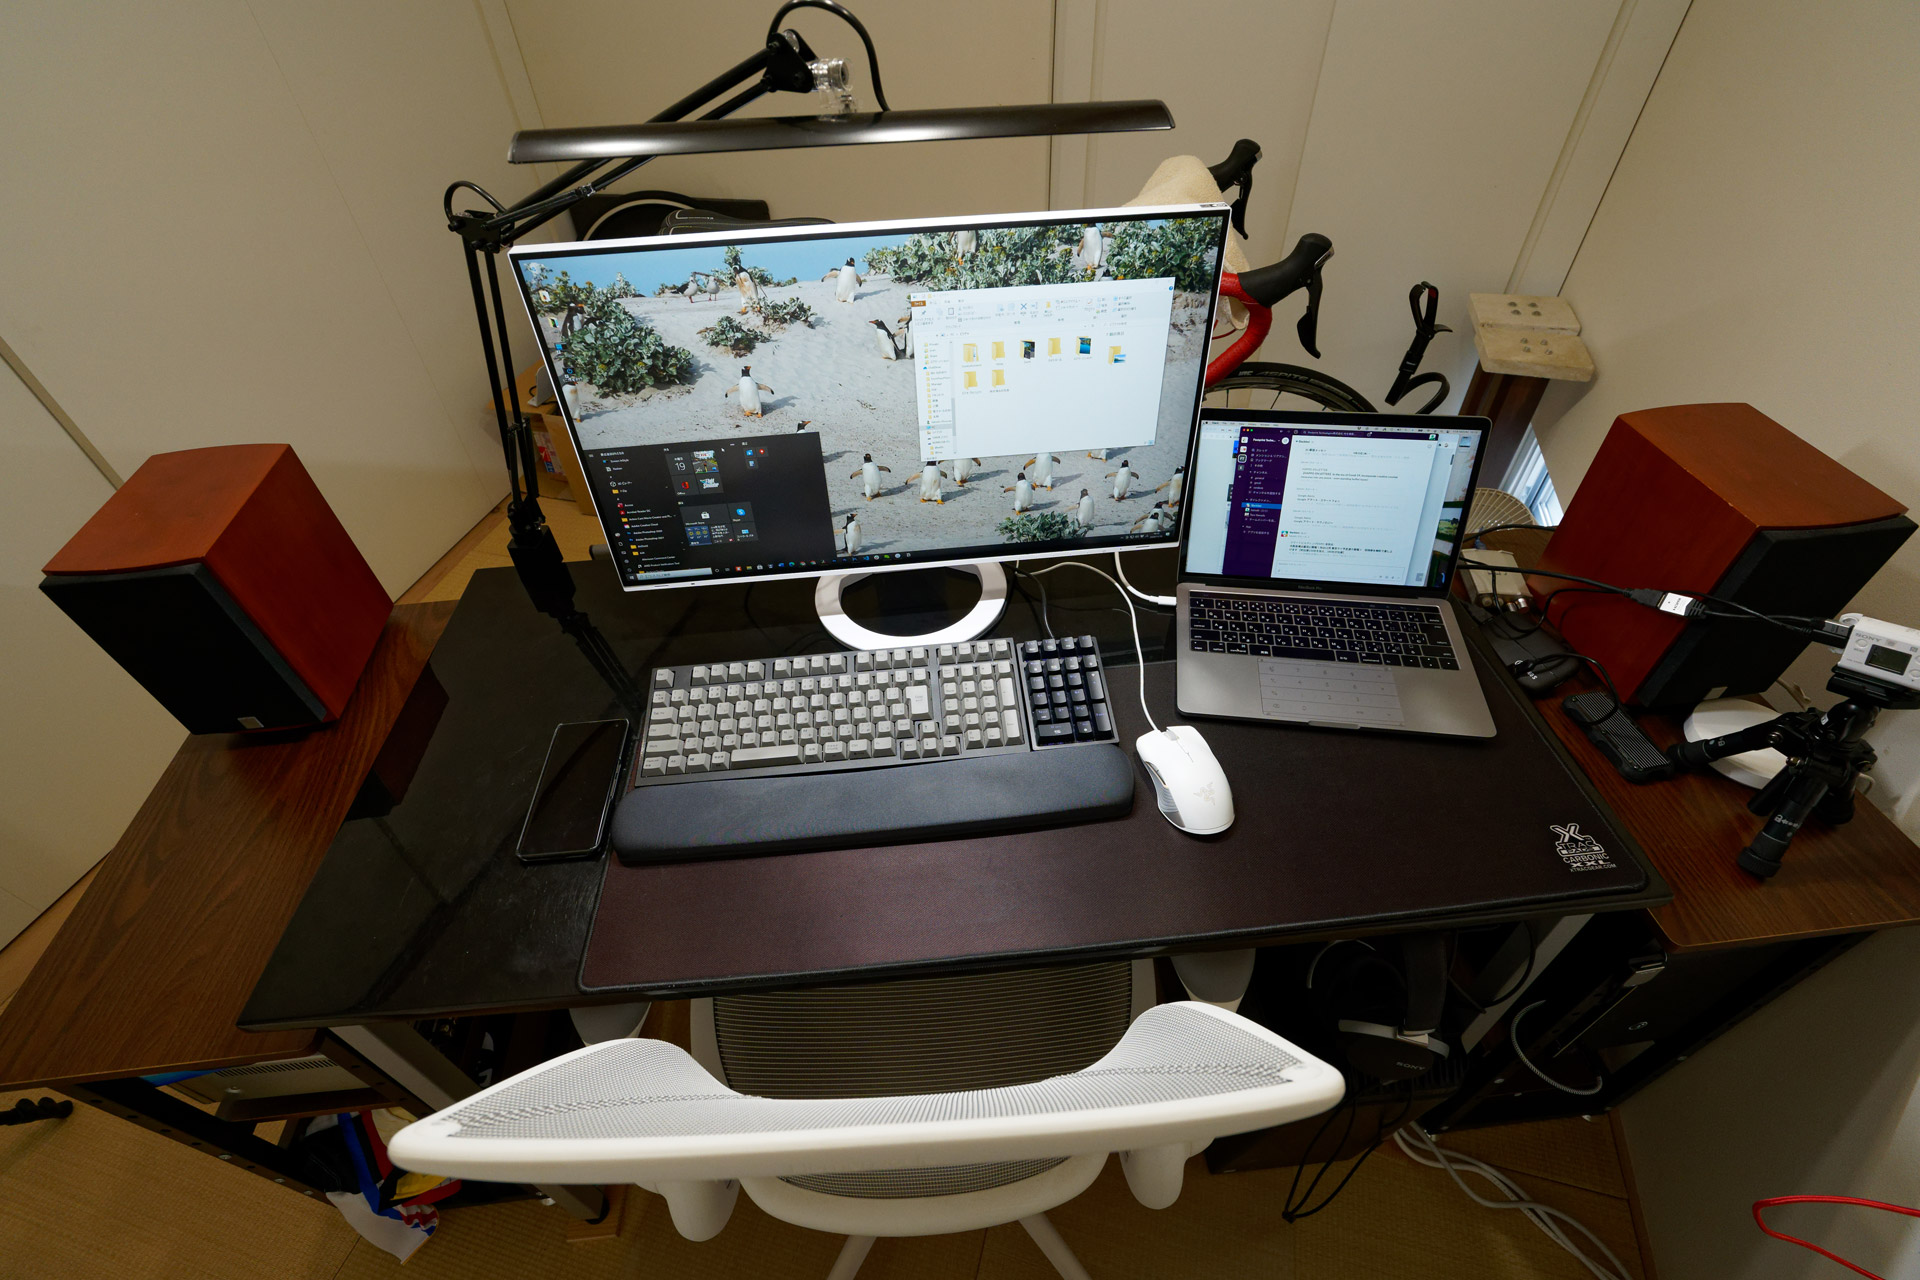 Notebook and desktop PC connected to the EV2795 with desktop screen currently displayed on EV2795.